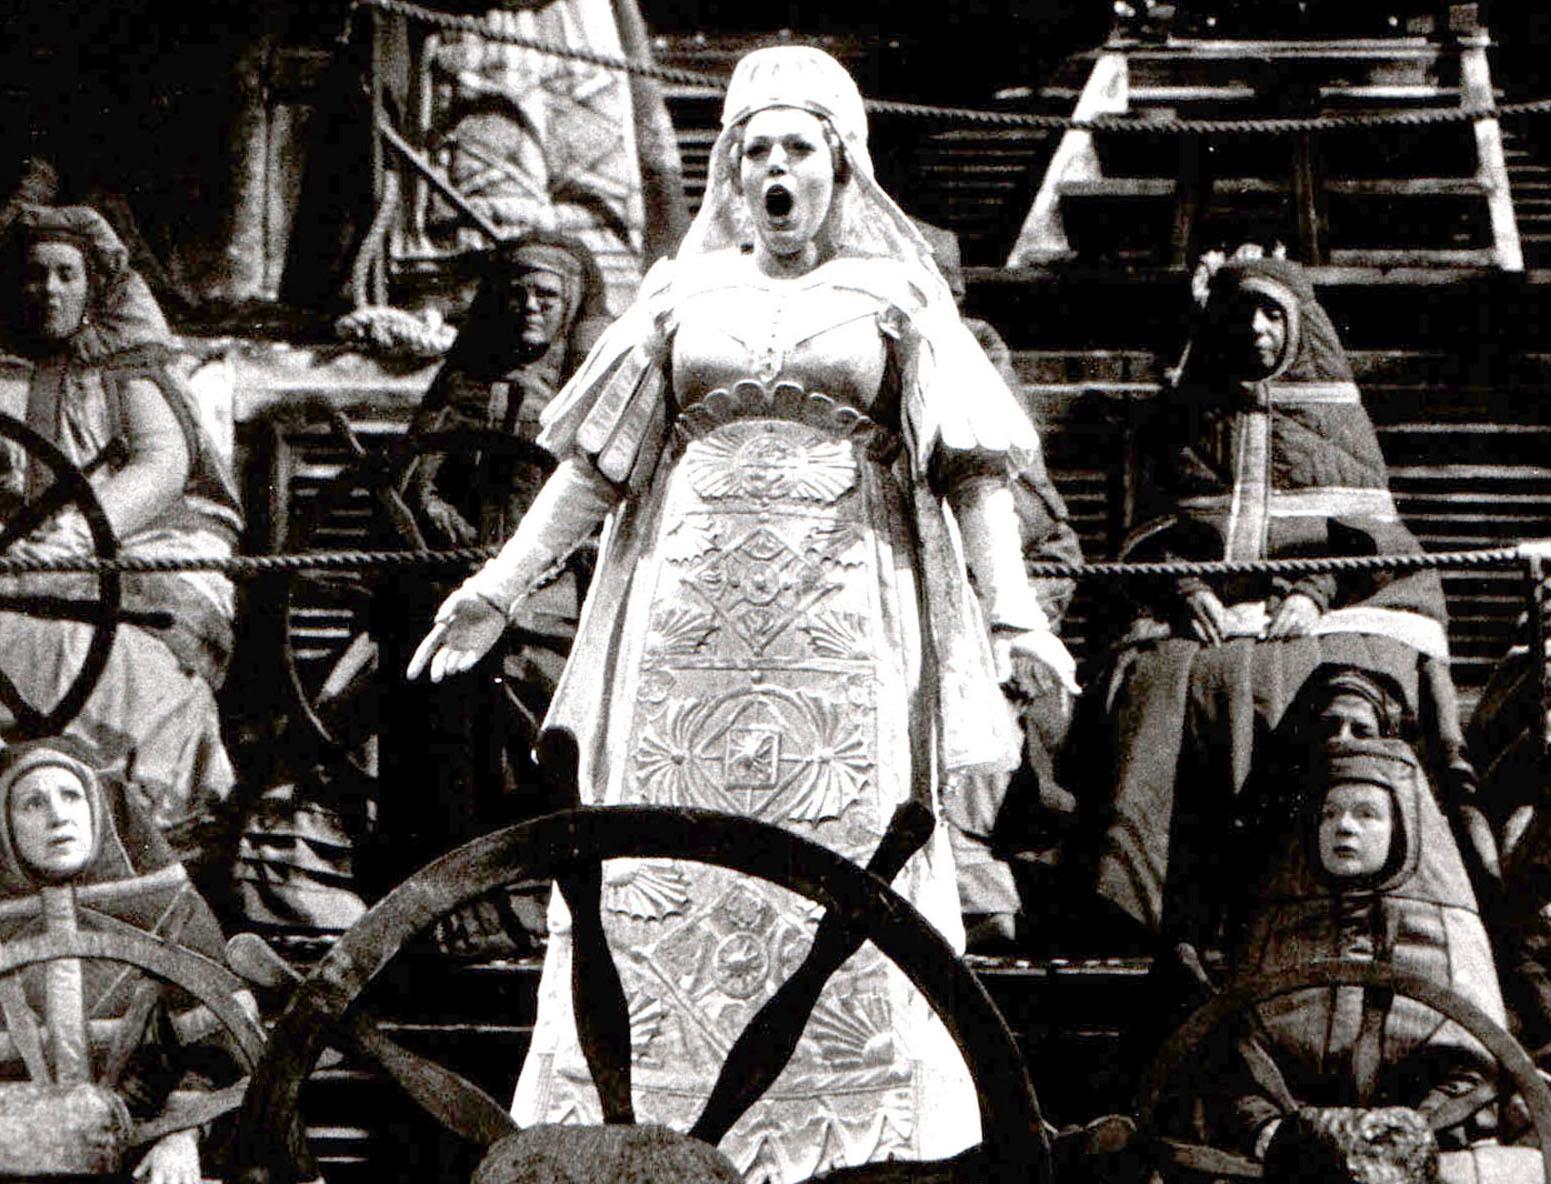 Teresa Kubiak in the Metropolitan Opera production of 'The Flying Dutchman' - Photograph by Jack Mitchell